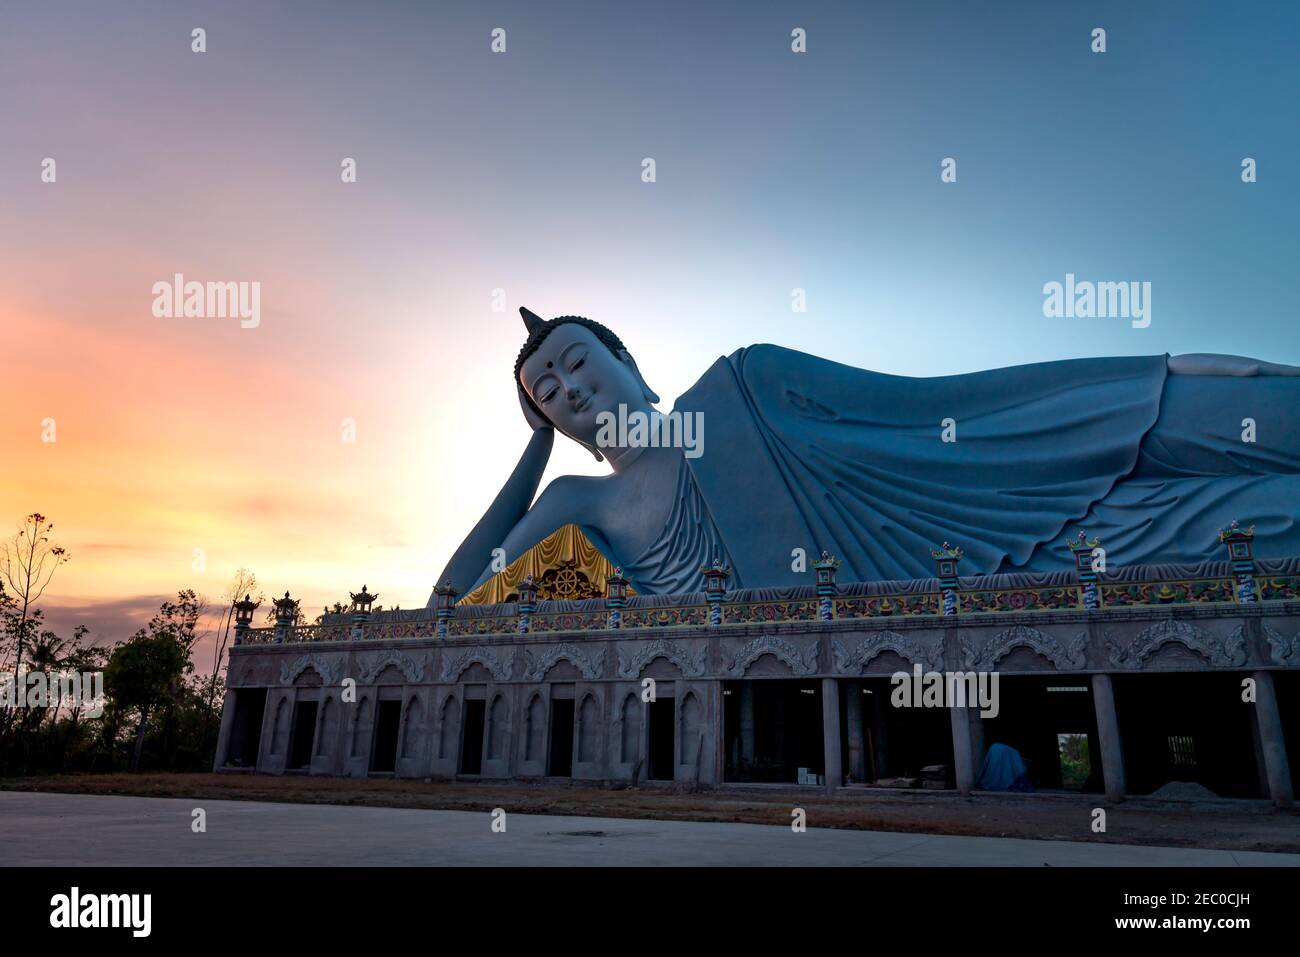 Soc Trang Province, Vietnam - February 6, 2021: The largest reclining Buddha in Vietnam at SomRong Pagoda in Soc Trang Province, Vietnam Stock Photo